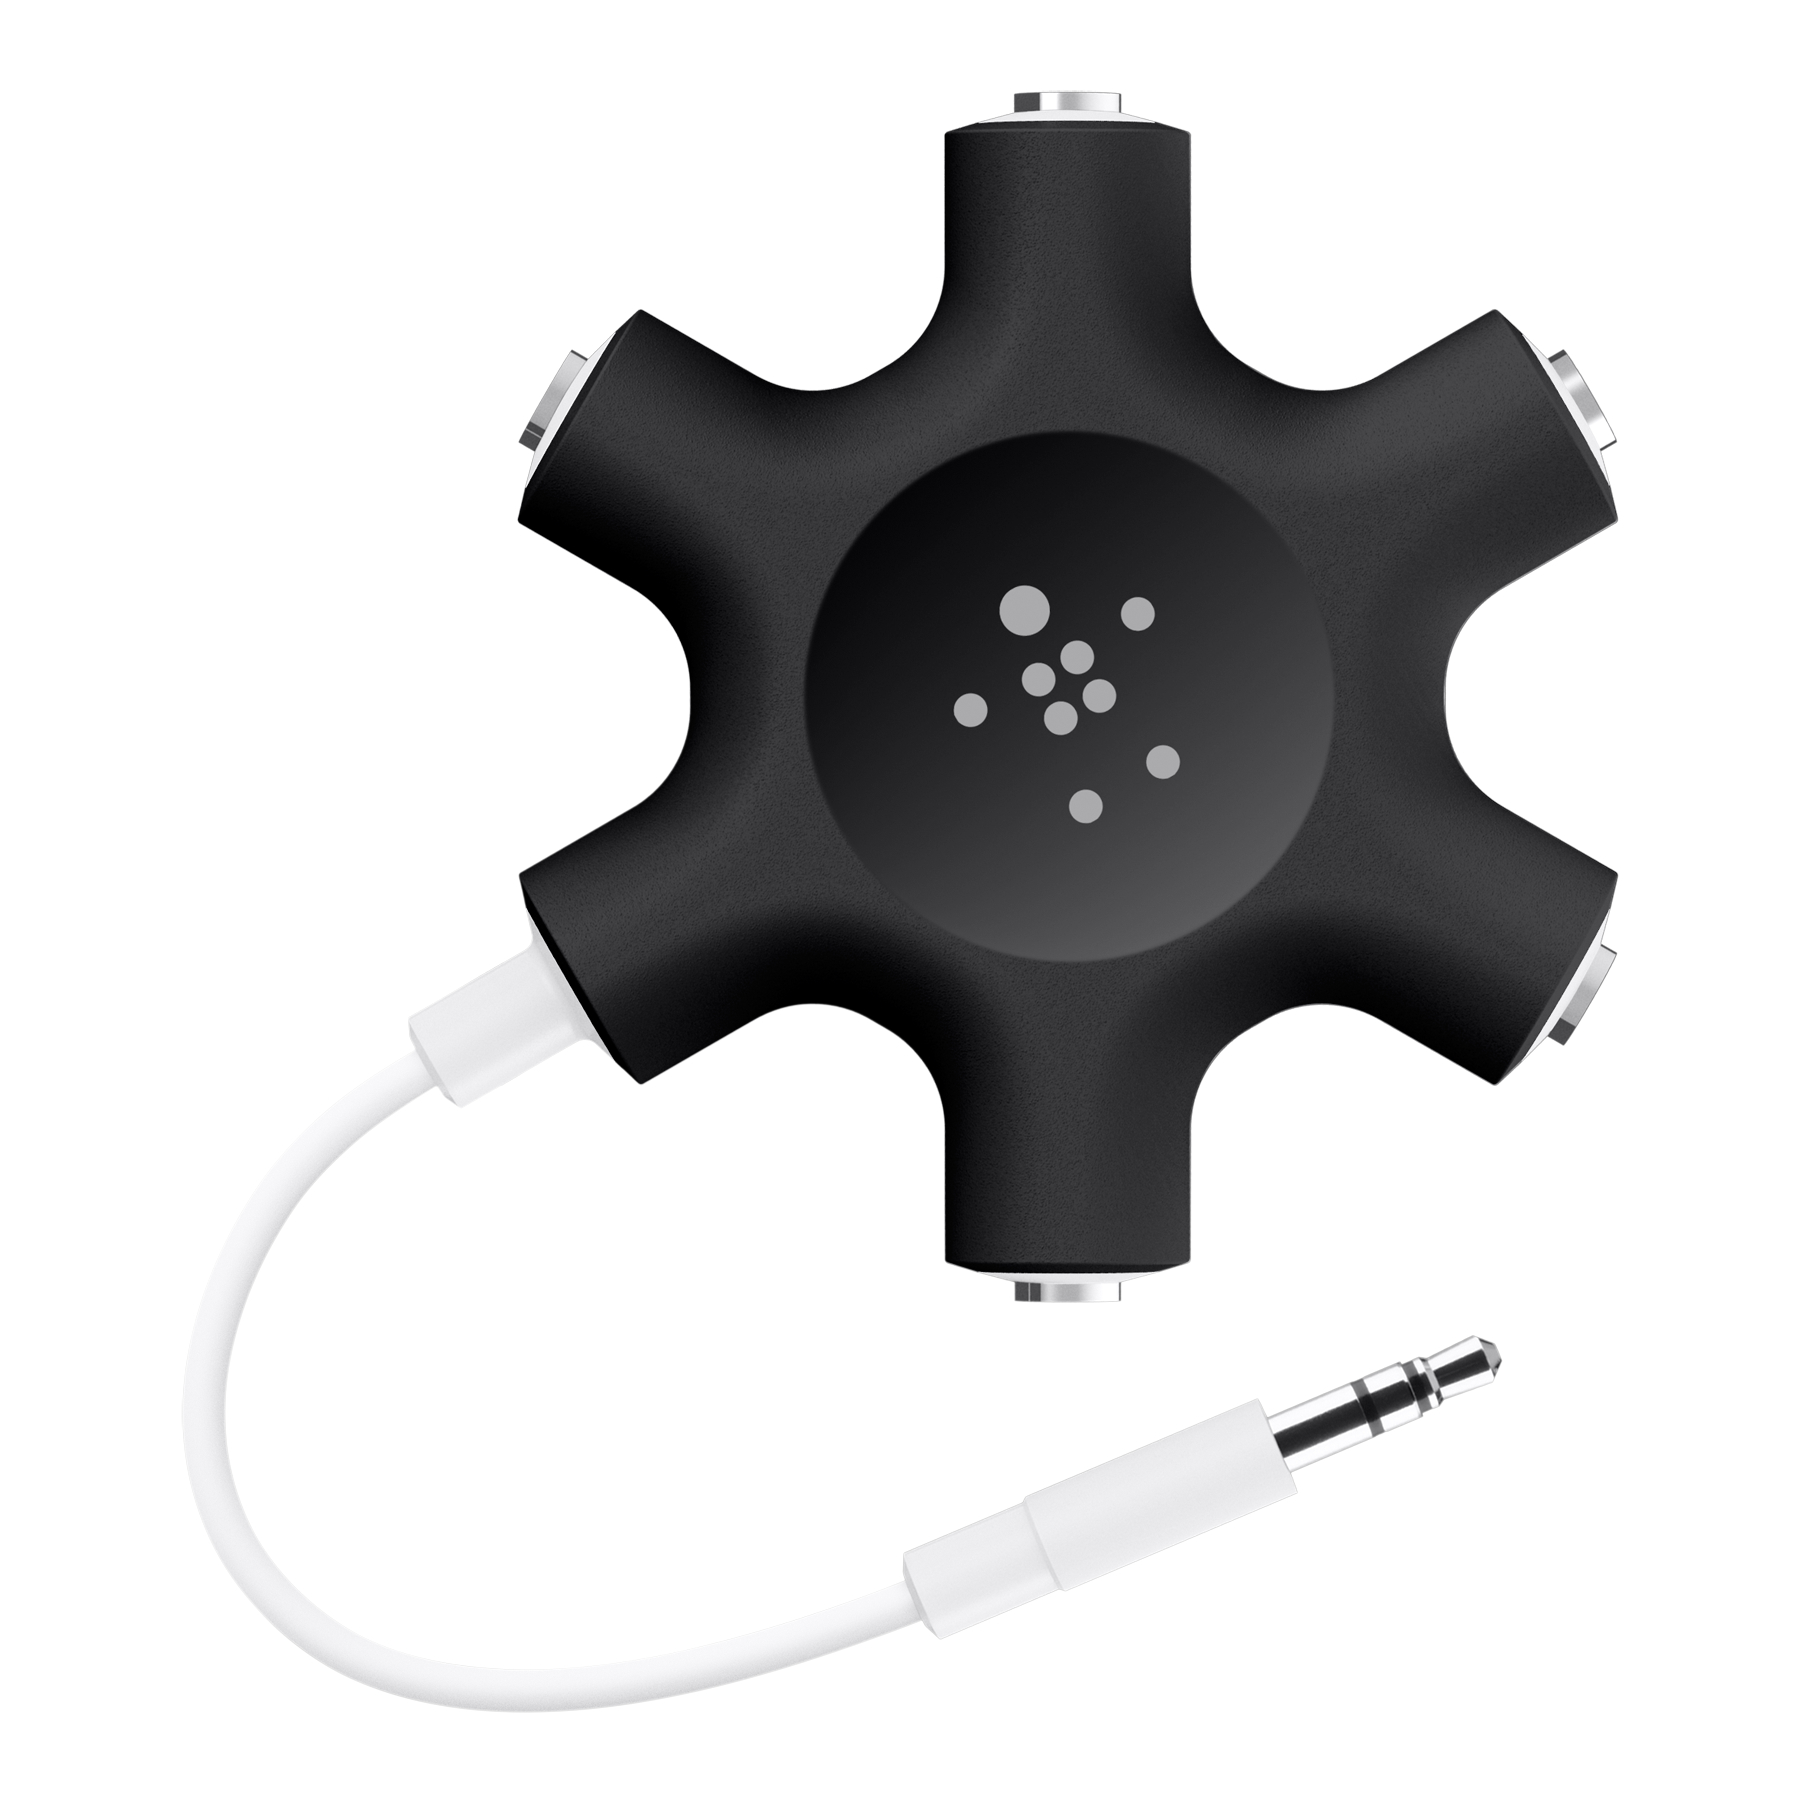 Belkin Rockstar 5-Jack Multi Headphone Audio Splitter - Headphone Splitter Designed To Connect Up To 5 Devices For Classrooms, Audio Mixing & Shared Experiences - For iPhone, iPad & More - image 1 of 5